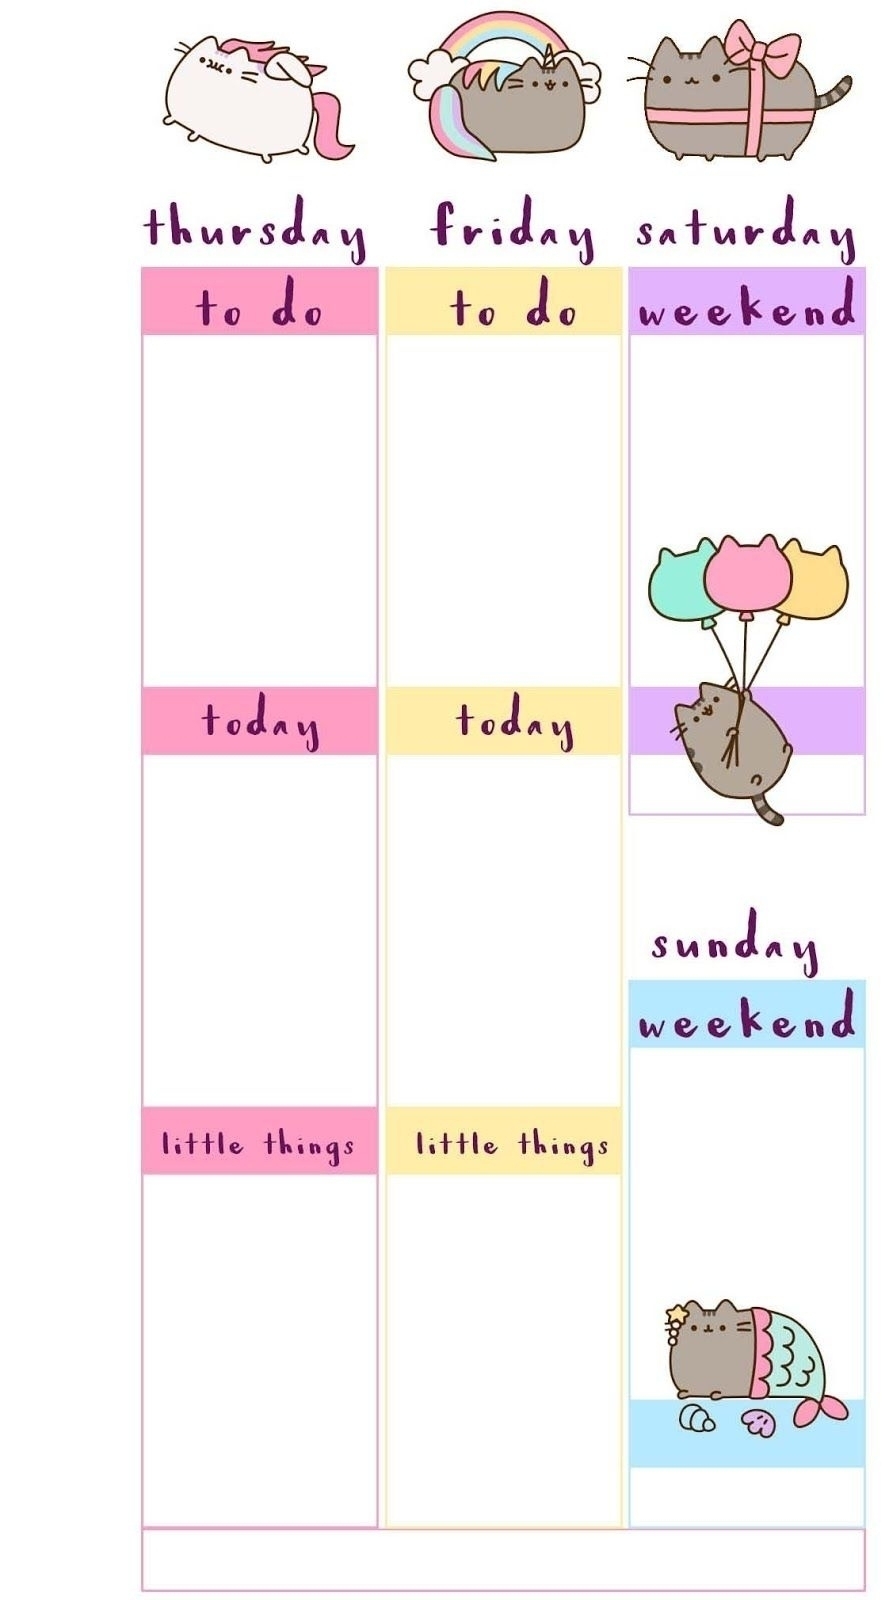 Sanrio A6 Monthly Planner Print | Template Calendar Printable regarding Sanrio A6 Monthly Planner Print